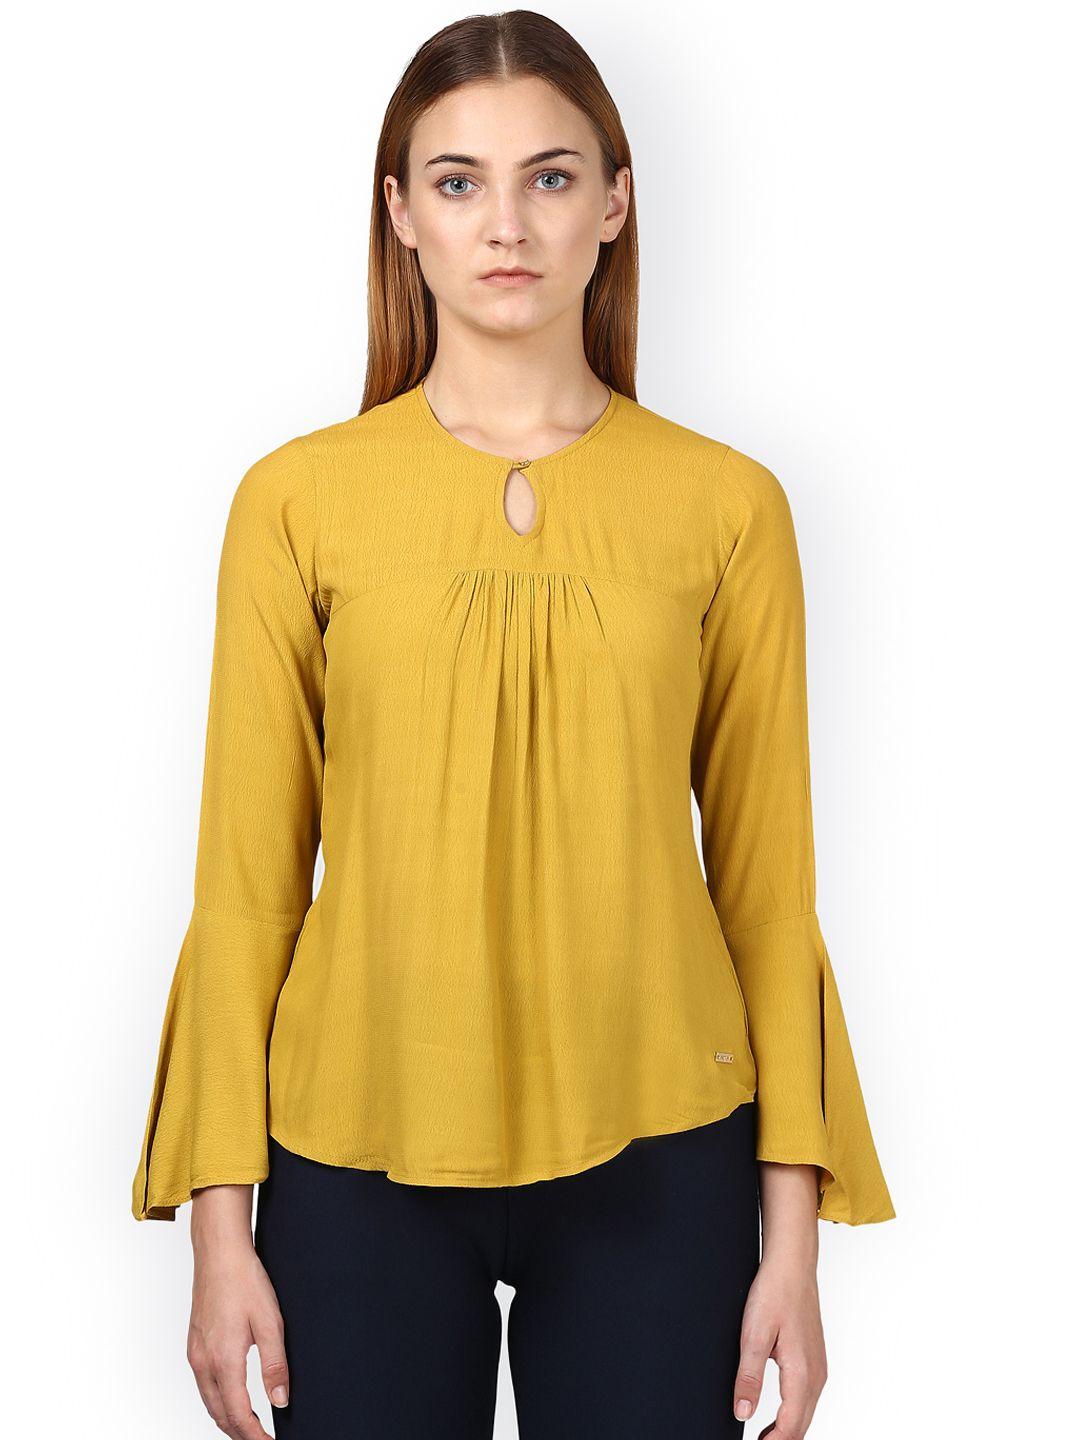 park-avenue-women-mustard-yellow-solid-a-line-top